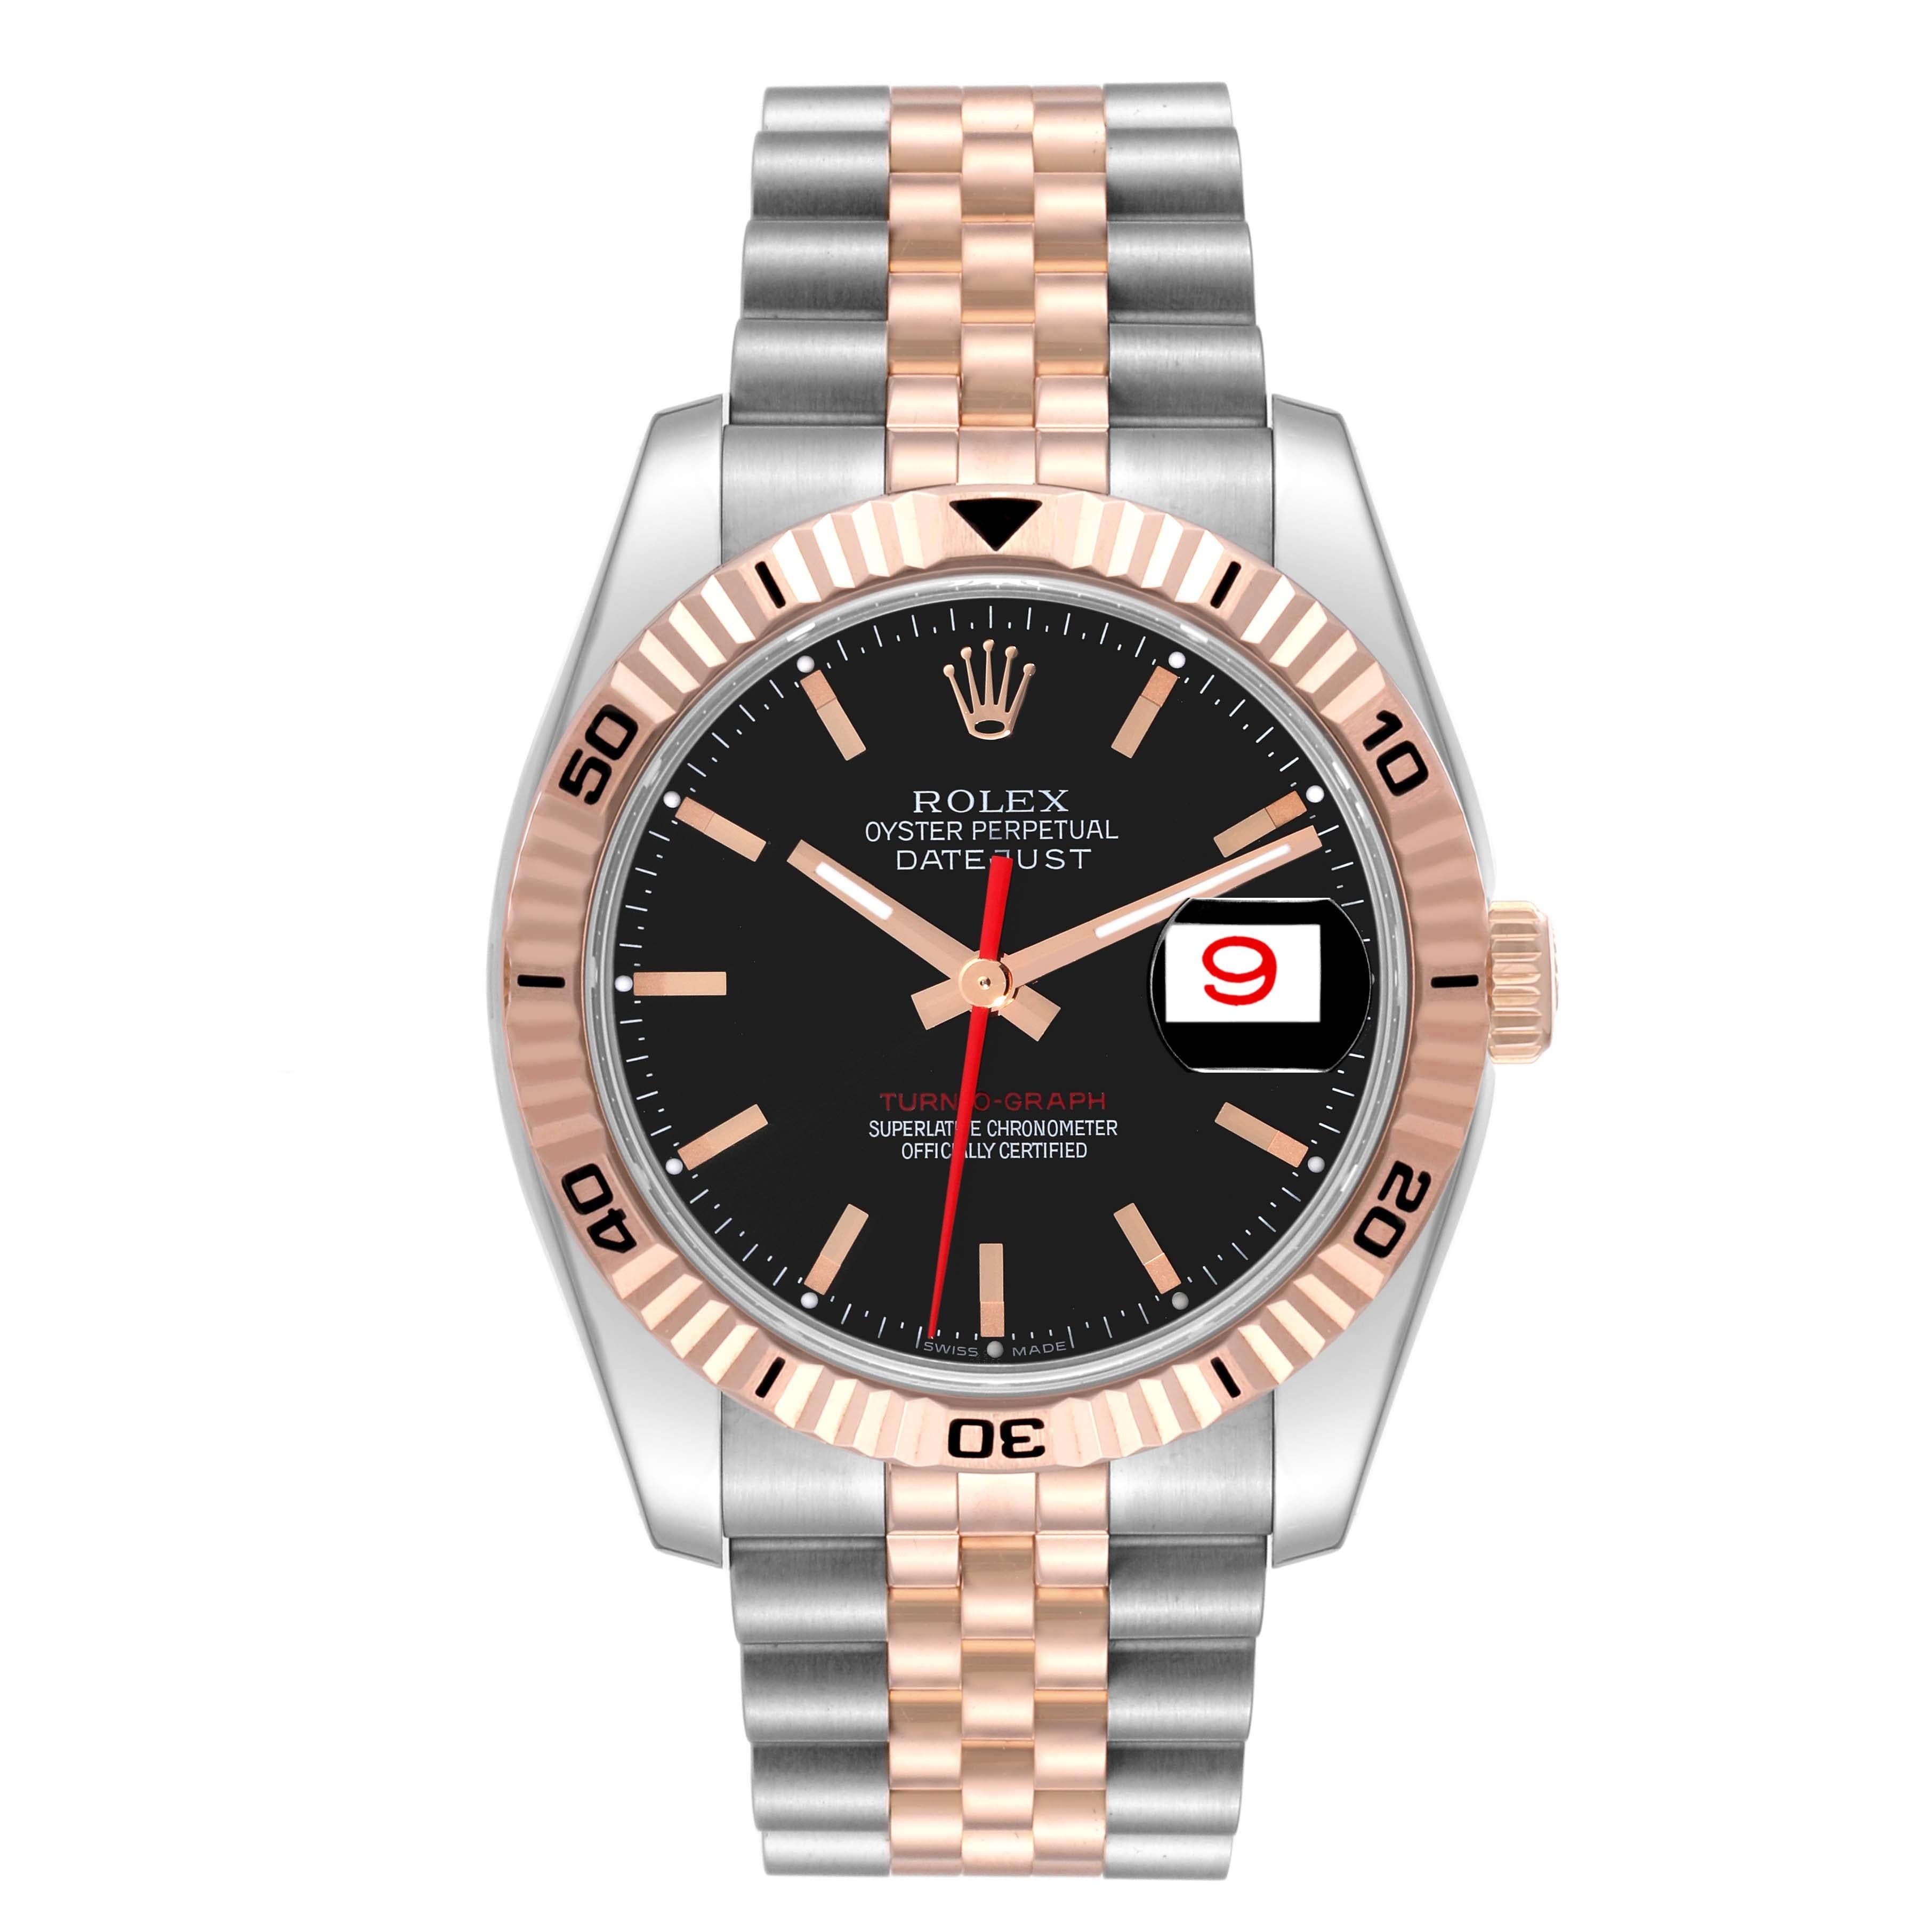 Rolex Datejust Turnograph Black Dial Steel Rose Gold Mens Watch 116261 Box Card. Officially certified chronometer automatic self-winding movement. Stainless steel case 36.0 mm in diameter. Rolex logo on the crown. 18k Everose gold fluted